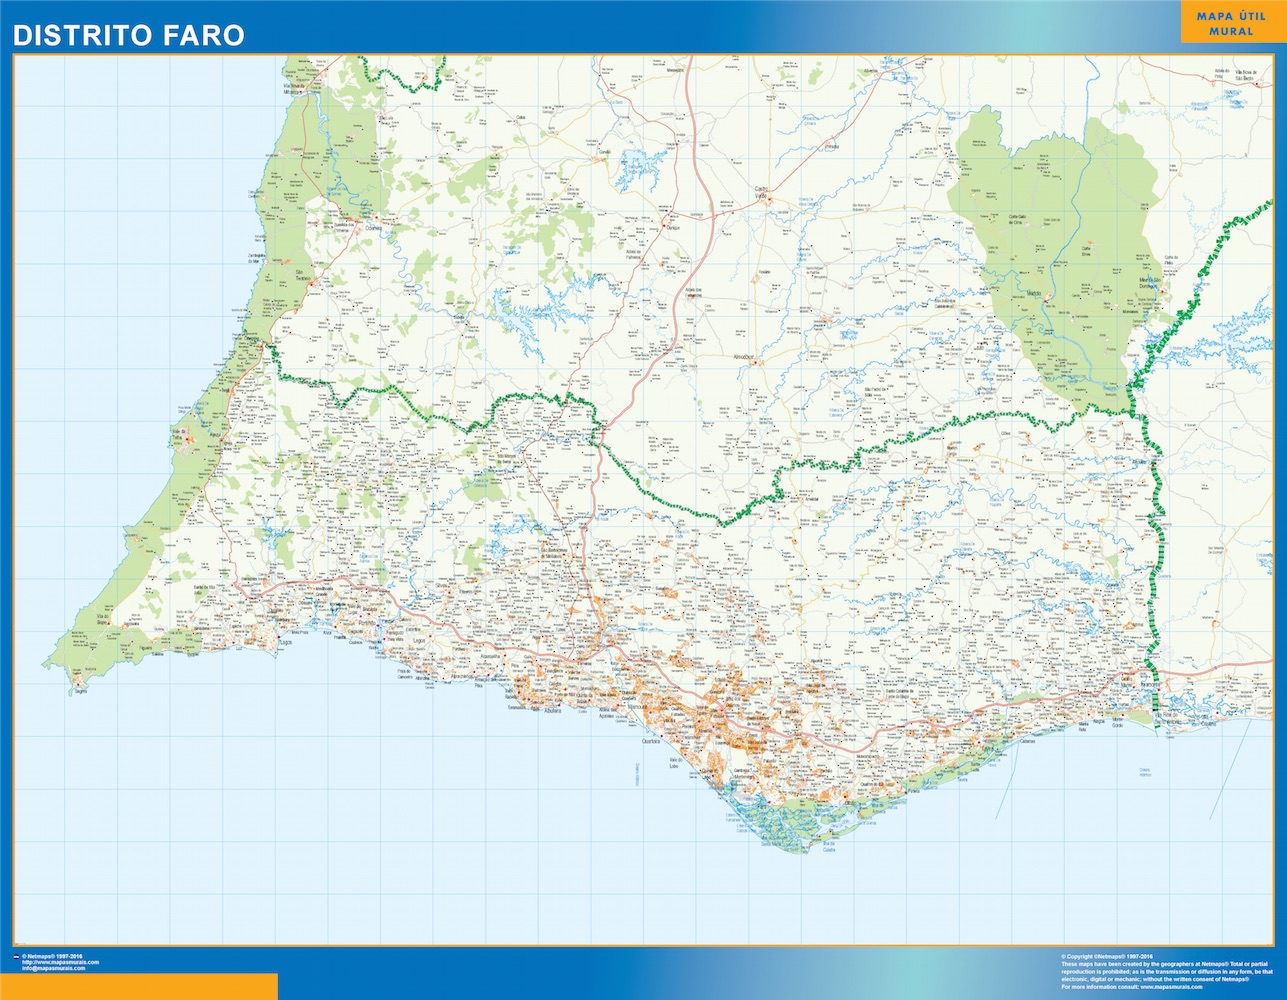 Region Of Faro Wall Map In Portugal Wall Maps Of Countries Of The World 7158